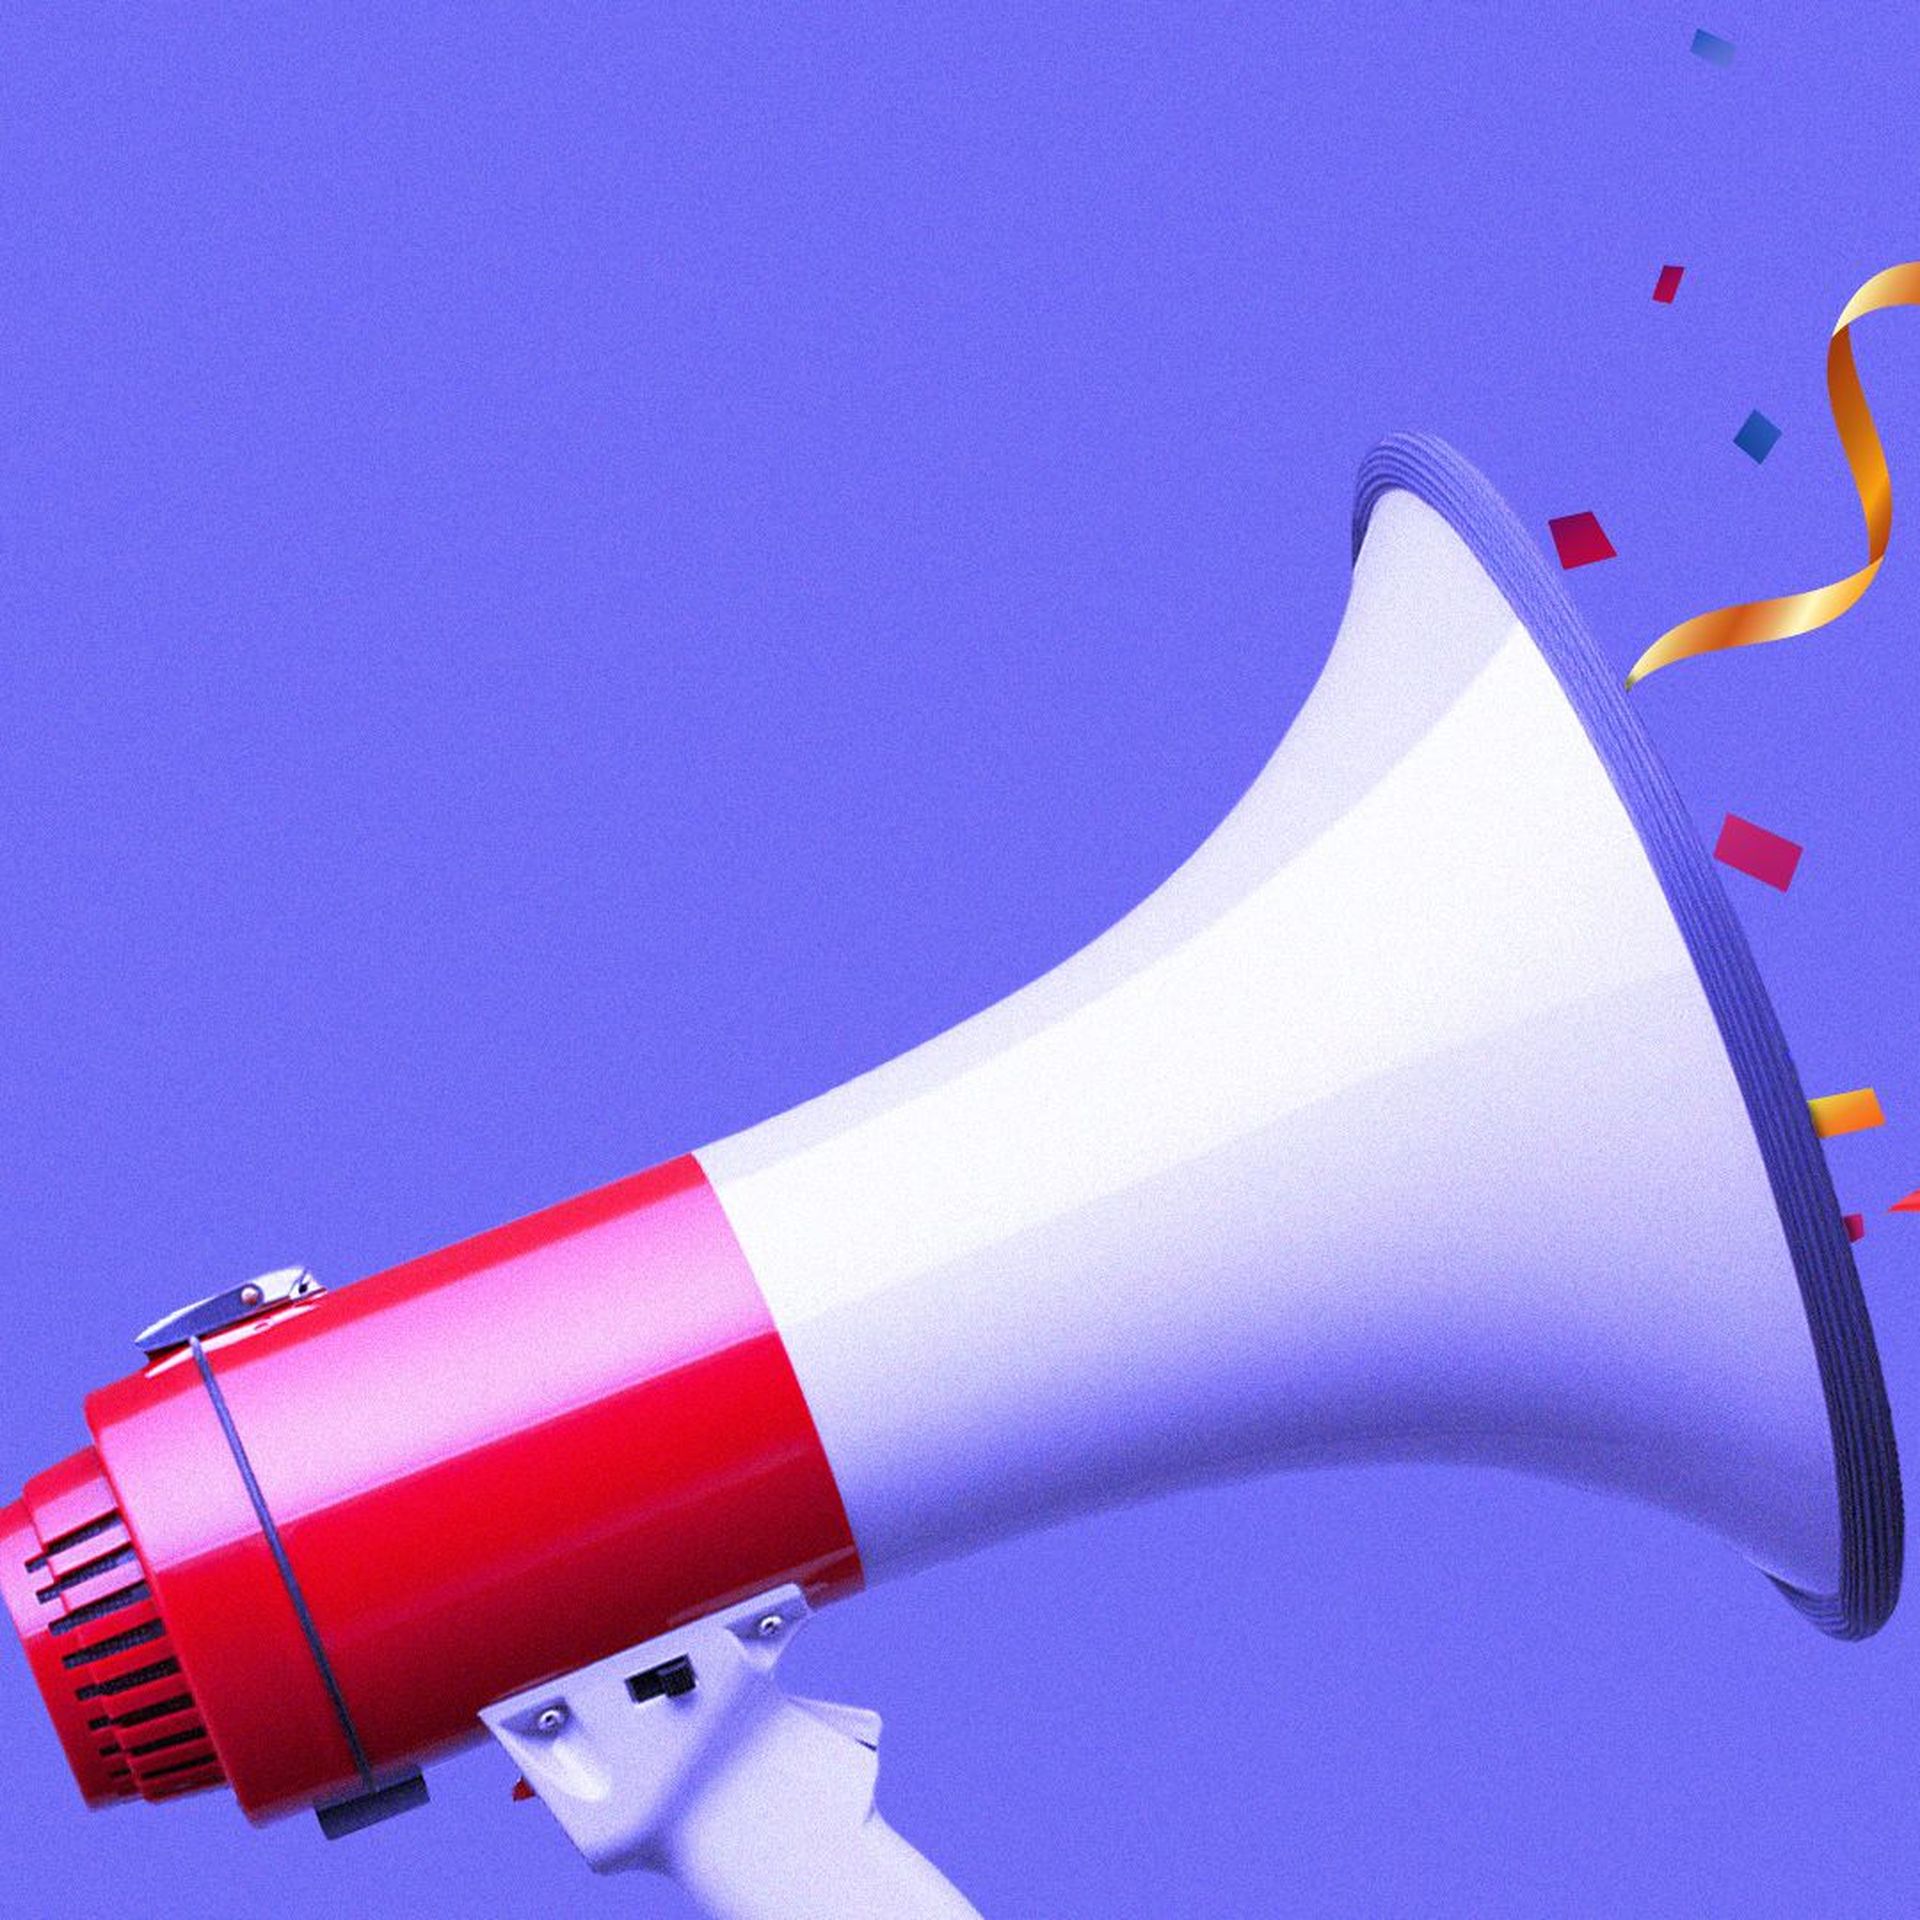 Illustration of ribbons and confetti coming out of a megaphone